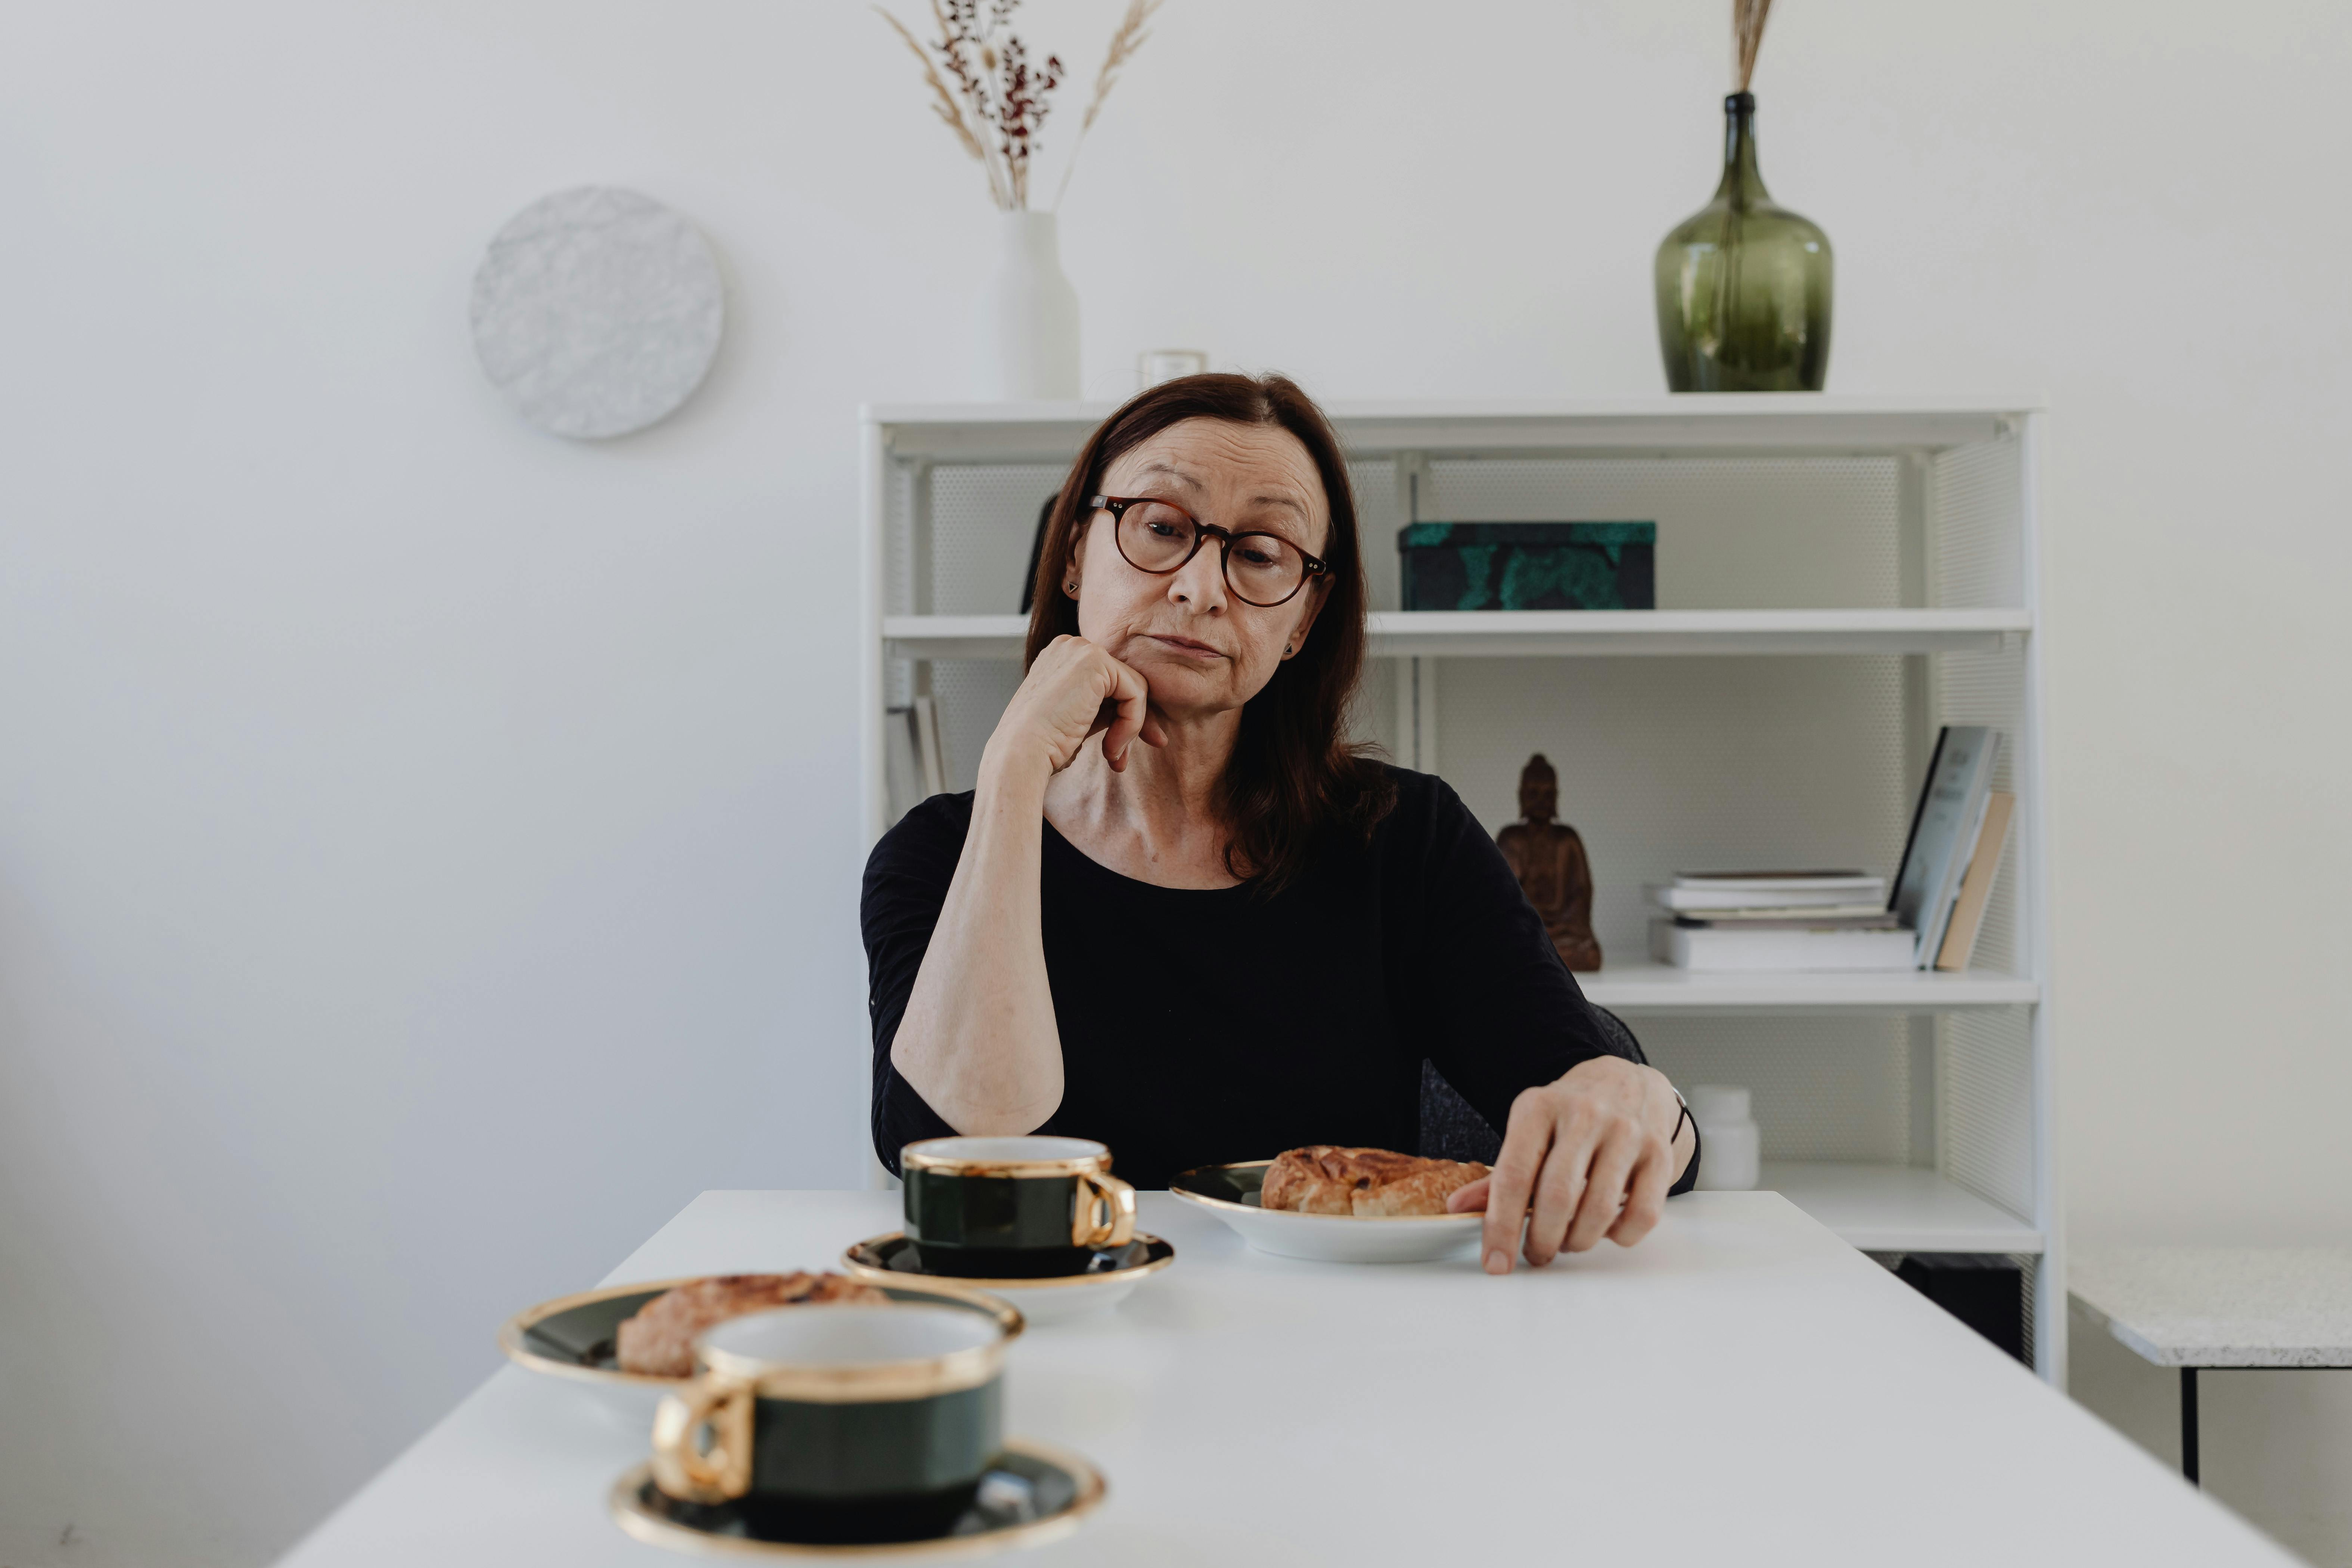 An unbothered older woman sitting at a table with food | Source: Pexels